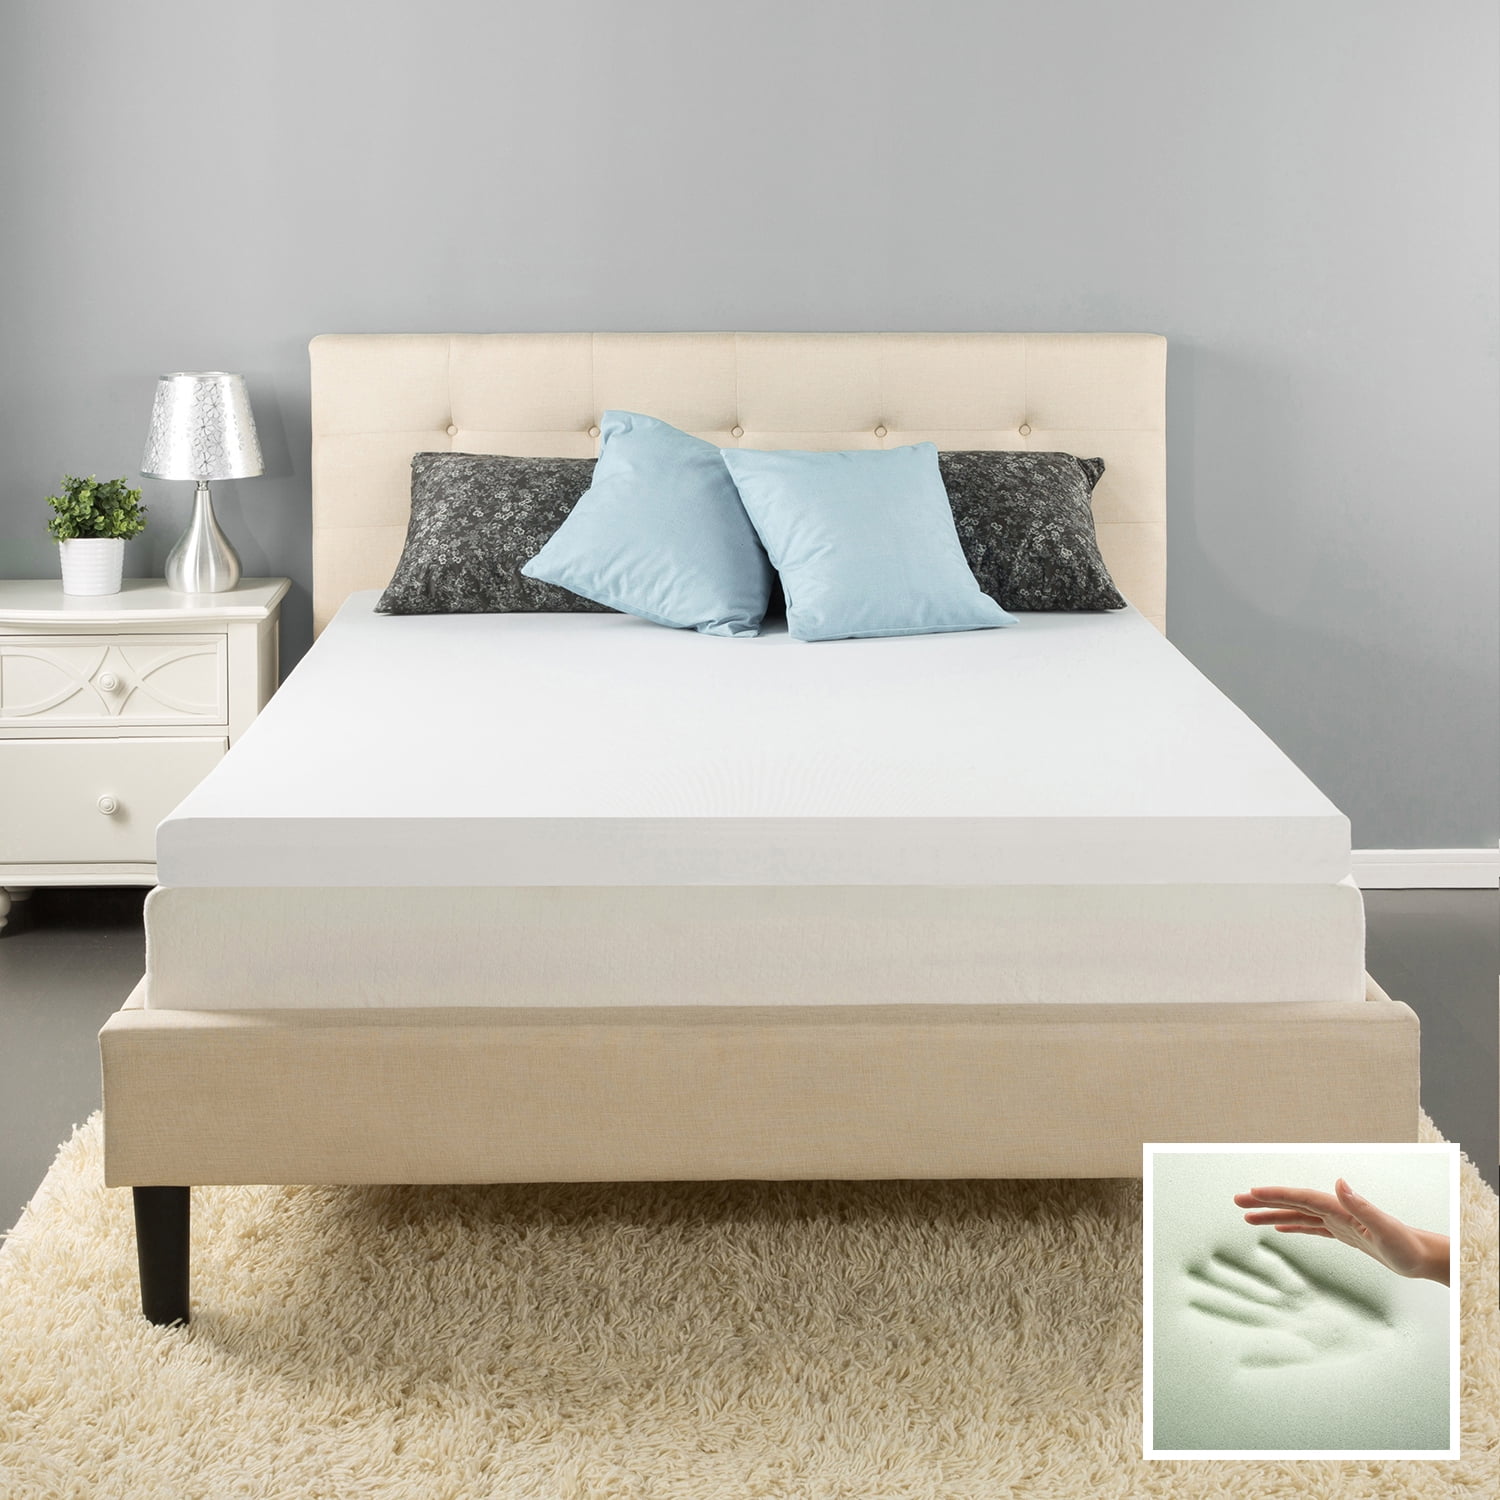 Ventilated Air Flow for Comfortable Sleeping More Restful Sleep Reduces Pressure Points Deco Home 3 Inch Queen Memory Foam Mattress Topper with Relaxing Infused Lavender Scent